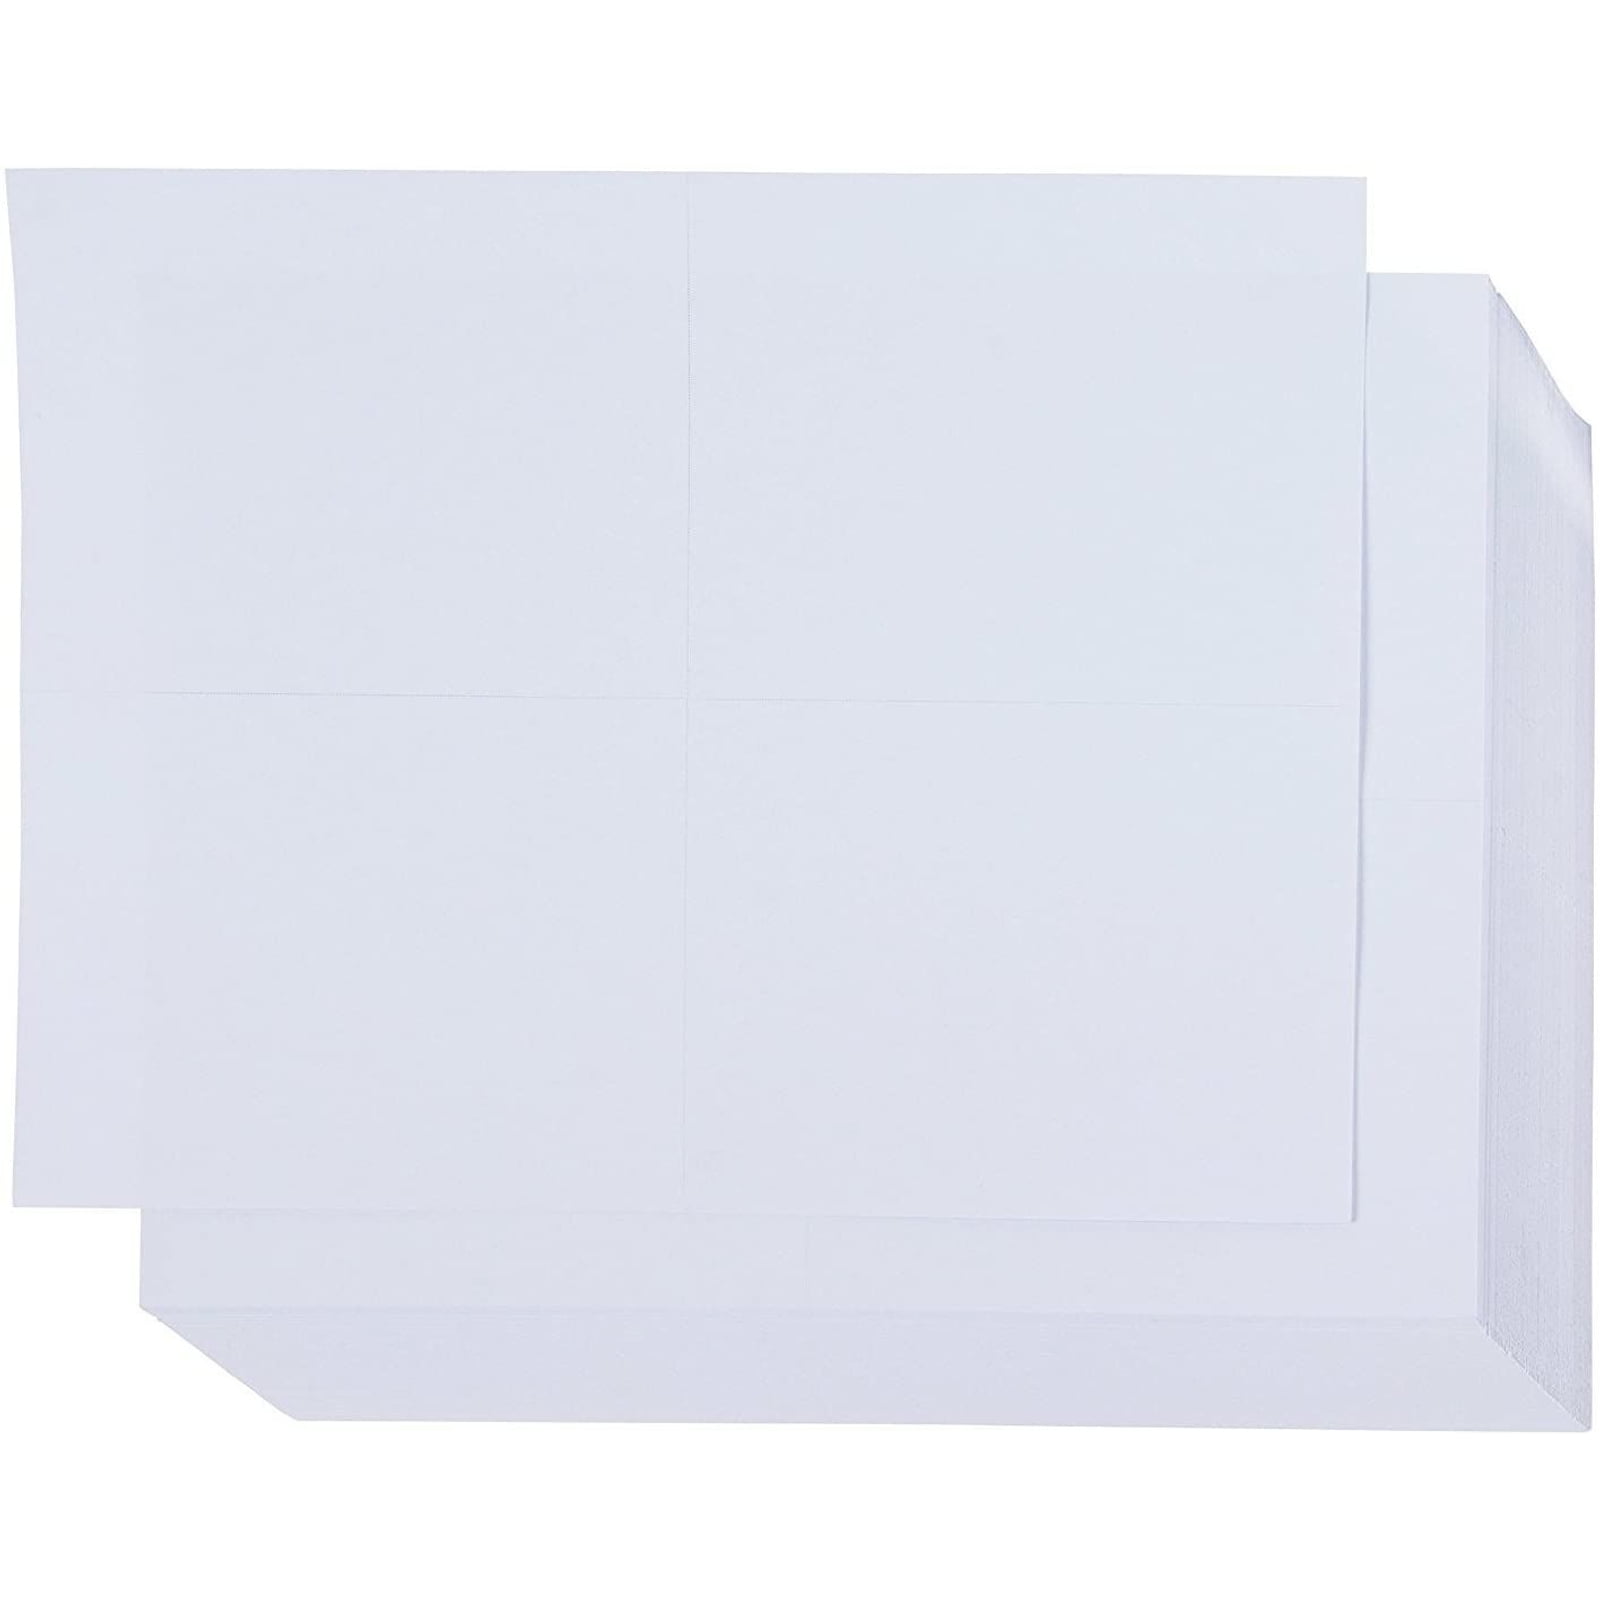 100 A4 WHITE QUALITY  CARD CRAFT CARD CARD MAKING CARD BLANKS 